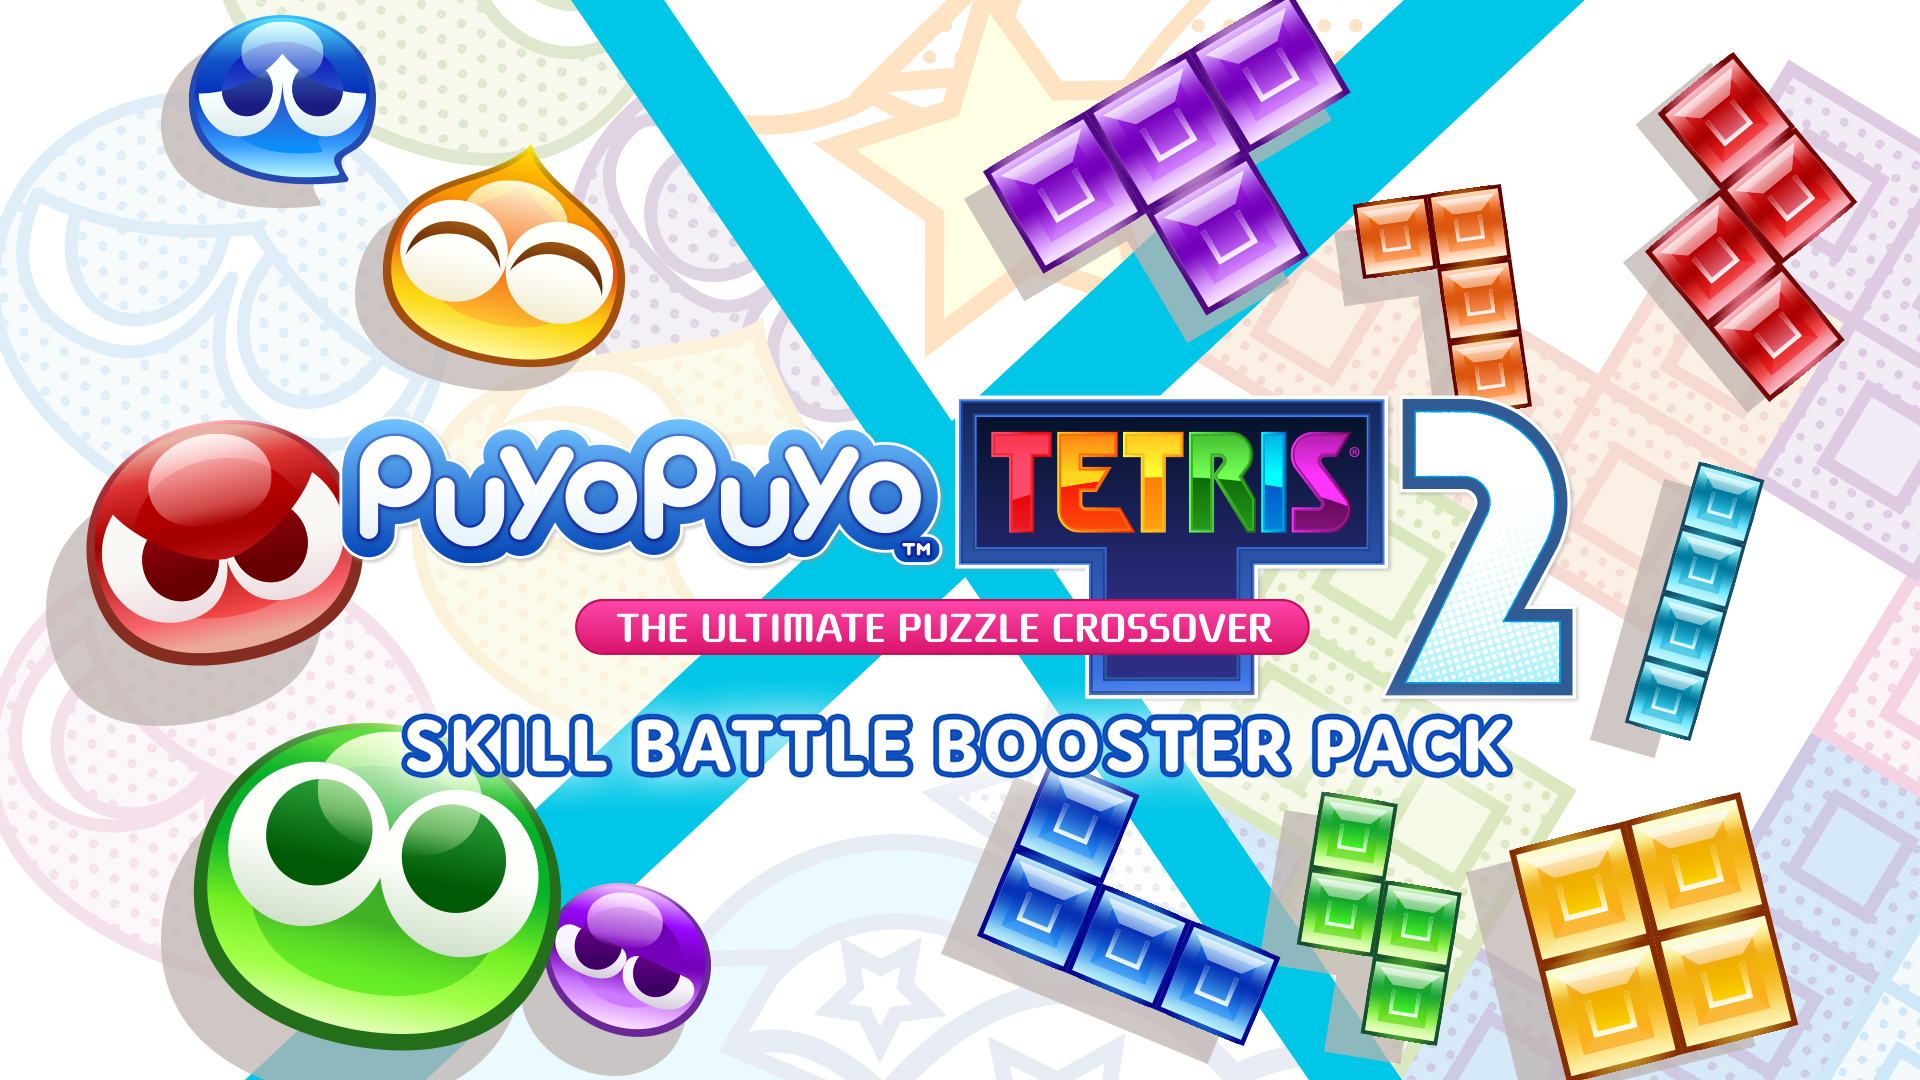 Skill Battle Booster Pack